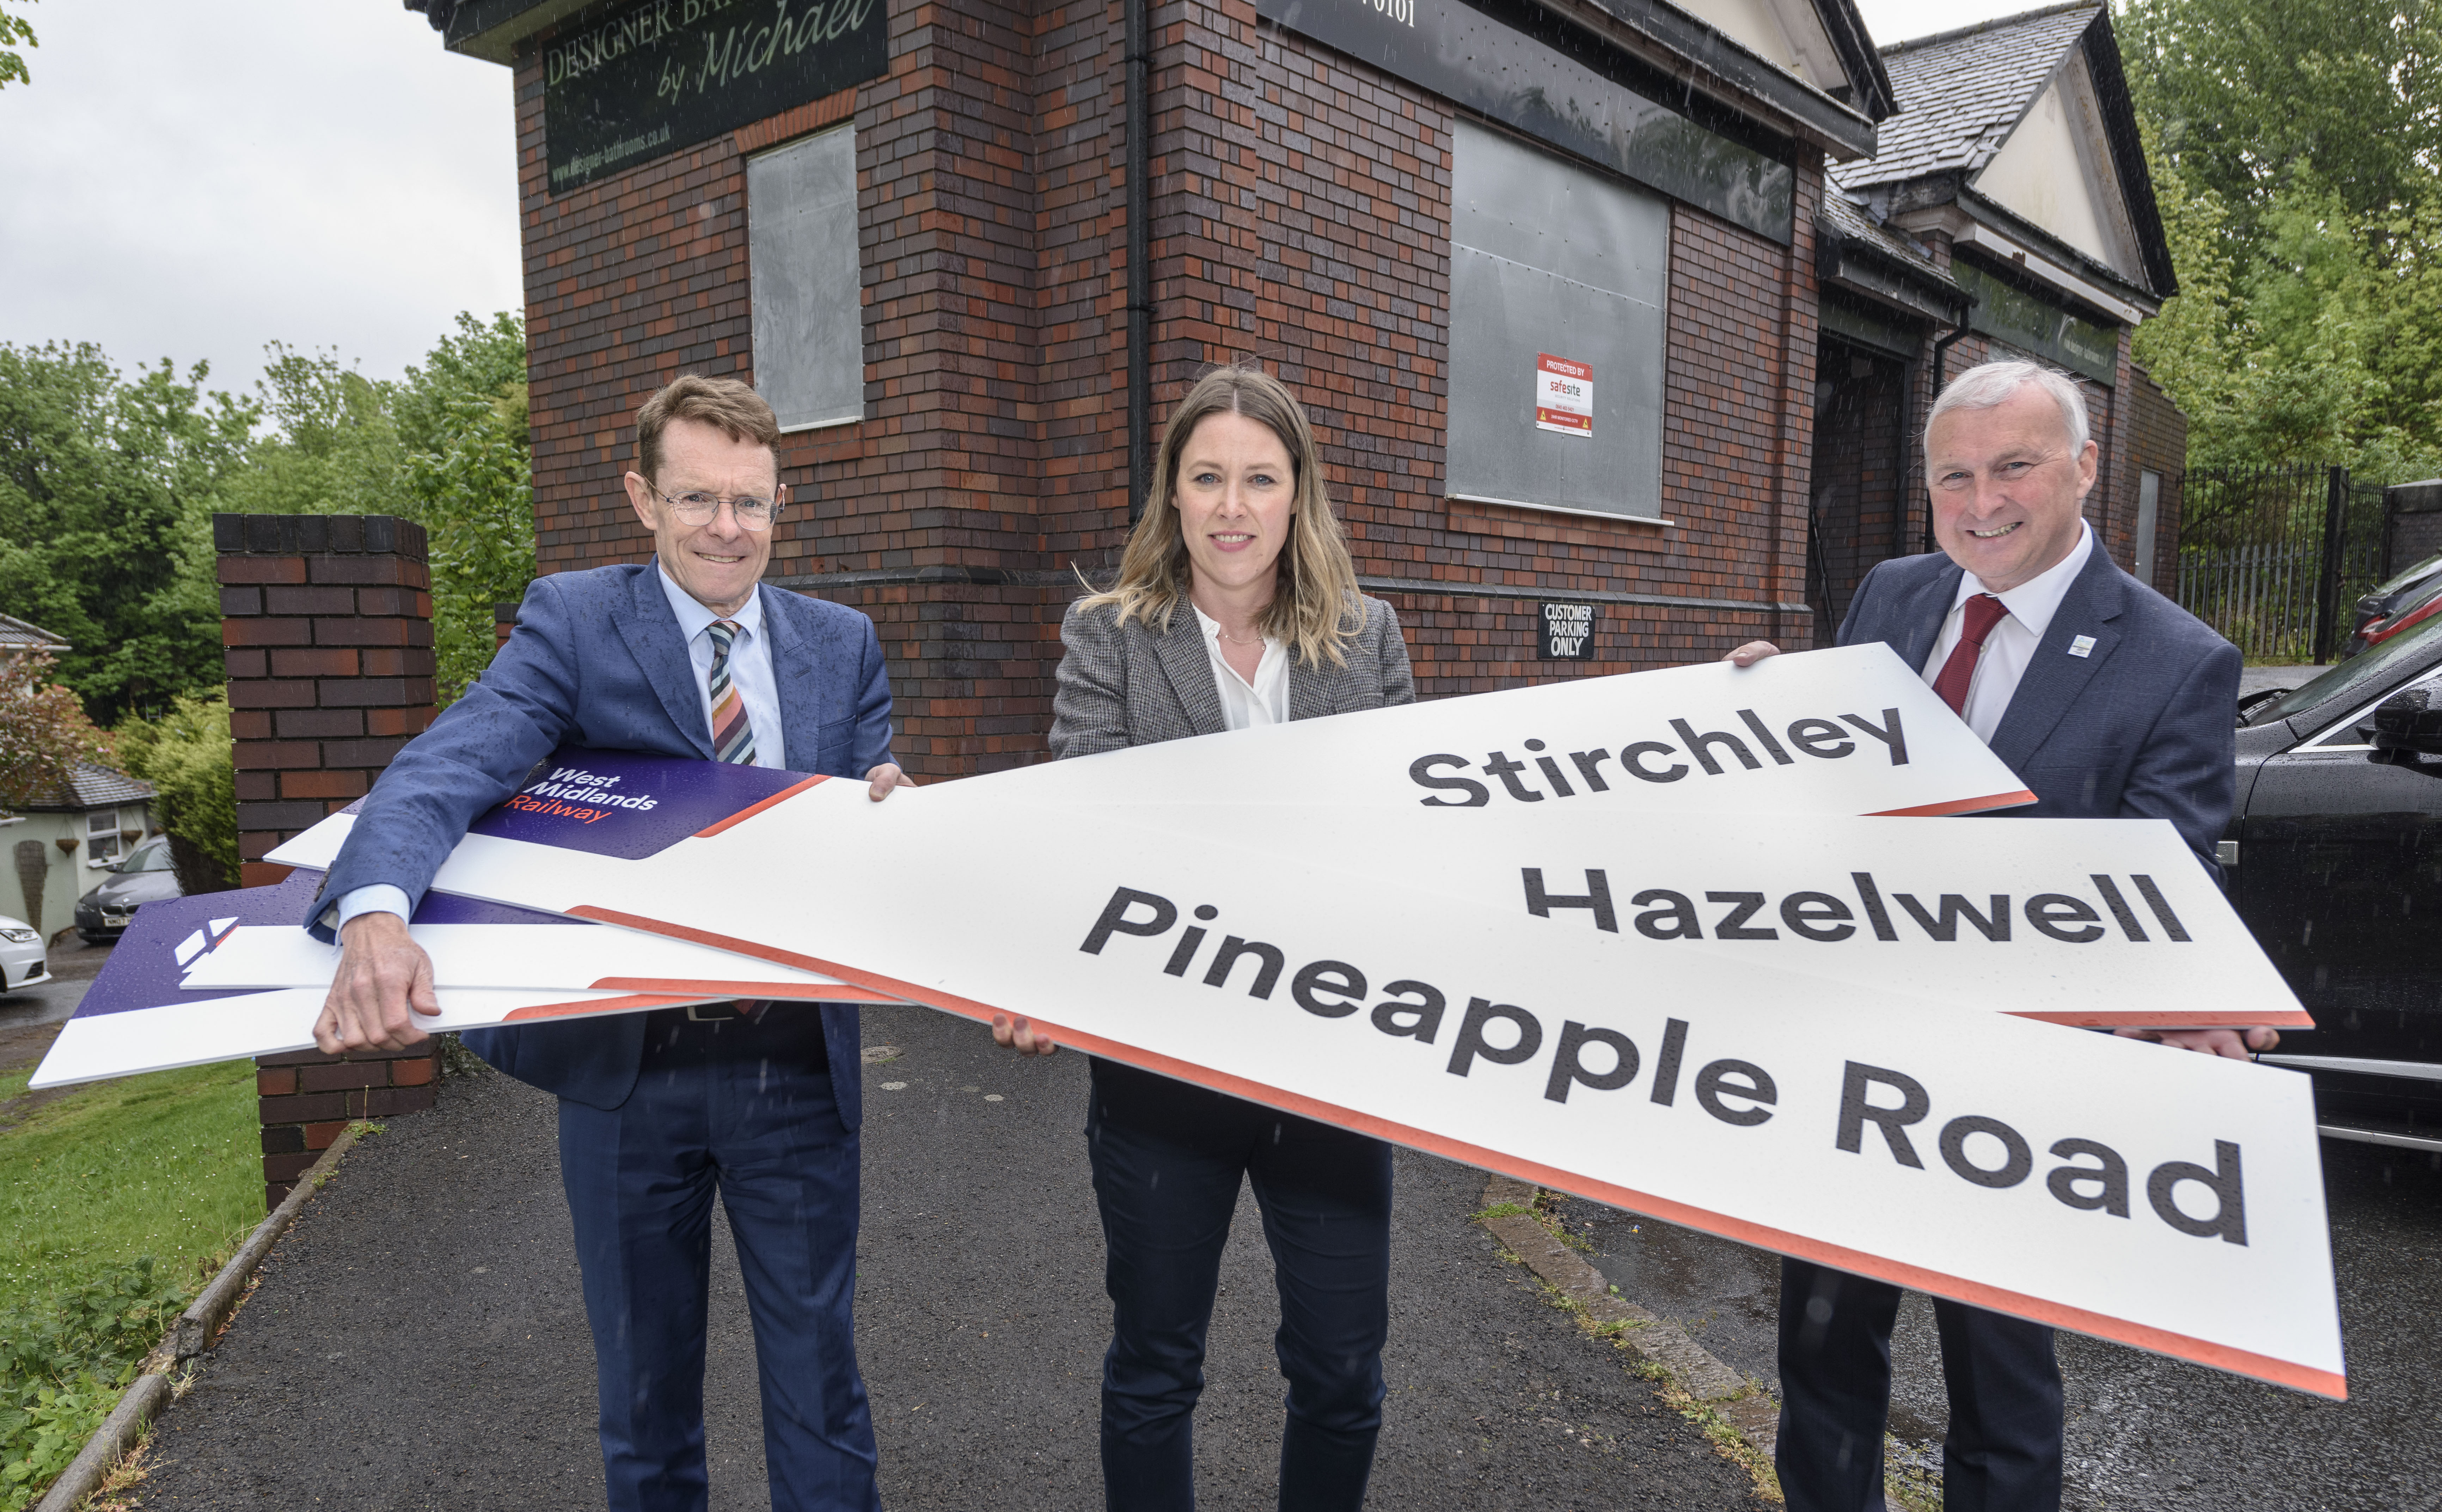 Mayor Andy Street, Kate Trevorrow (WMRE) and Cllr Ian Ward outside the former Hazelwell Station building with the proposed new names